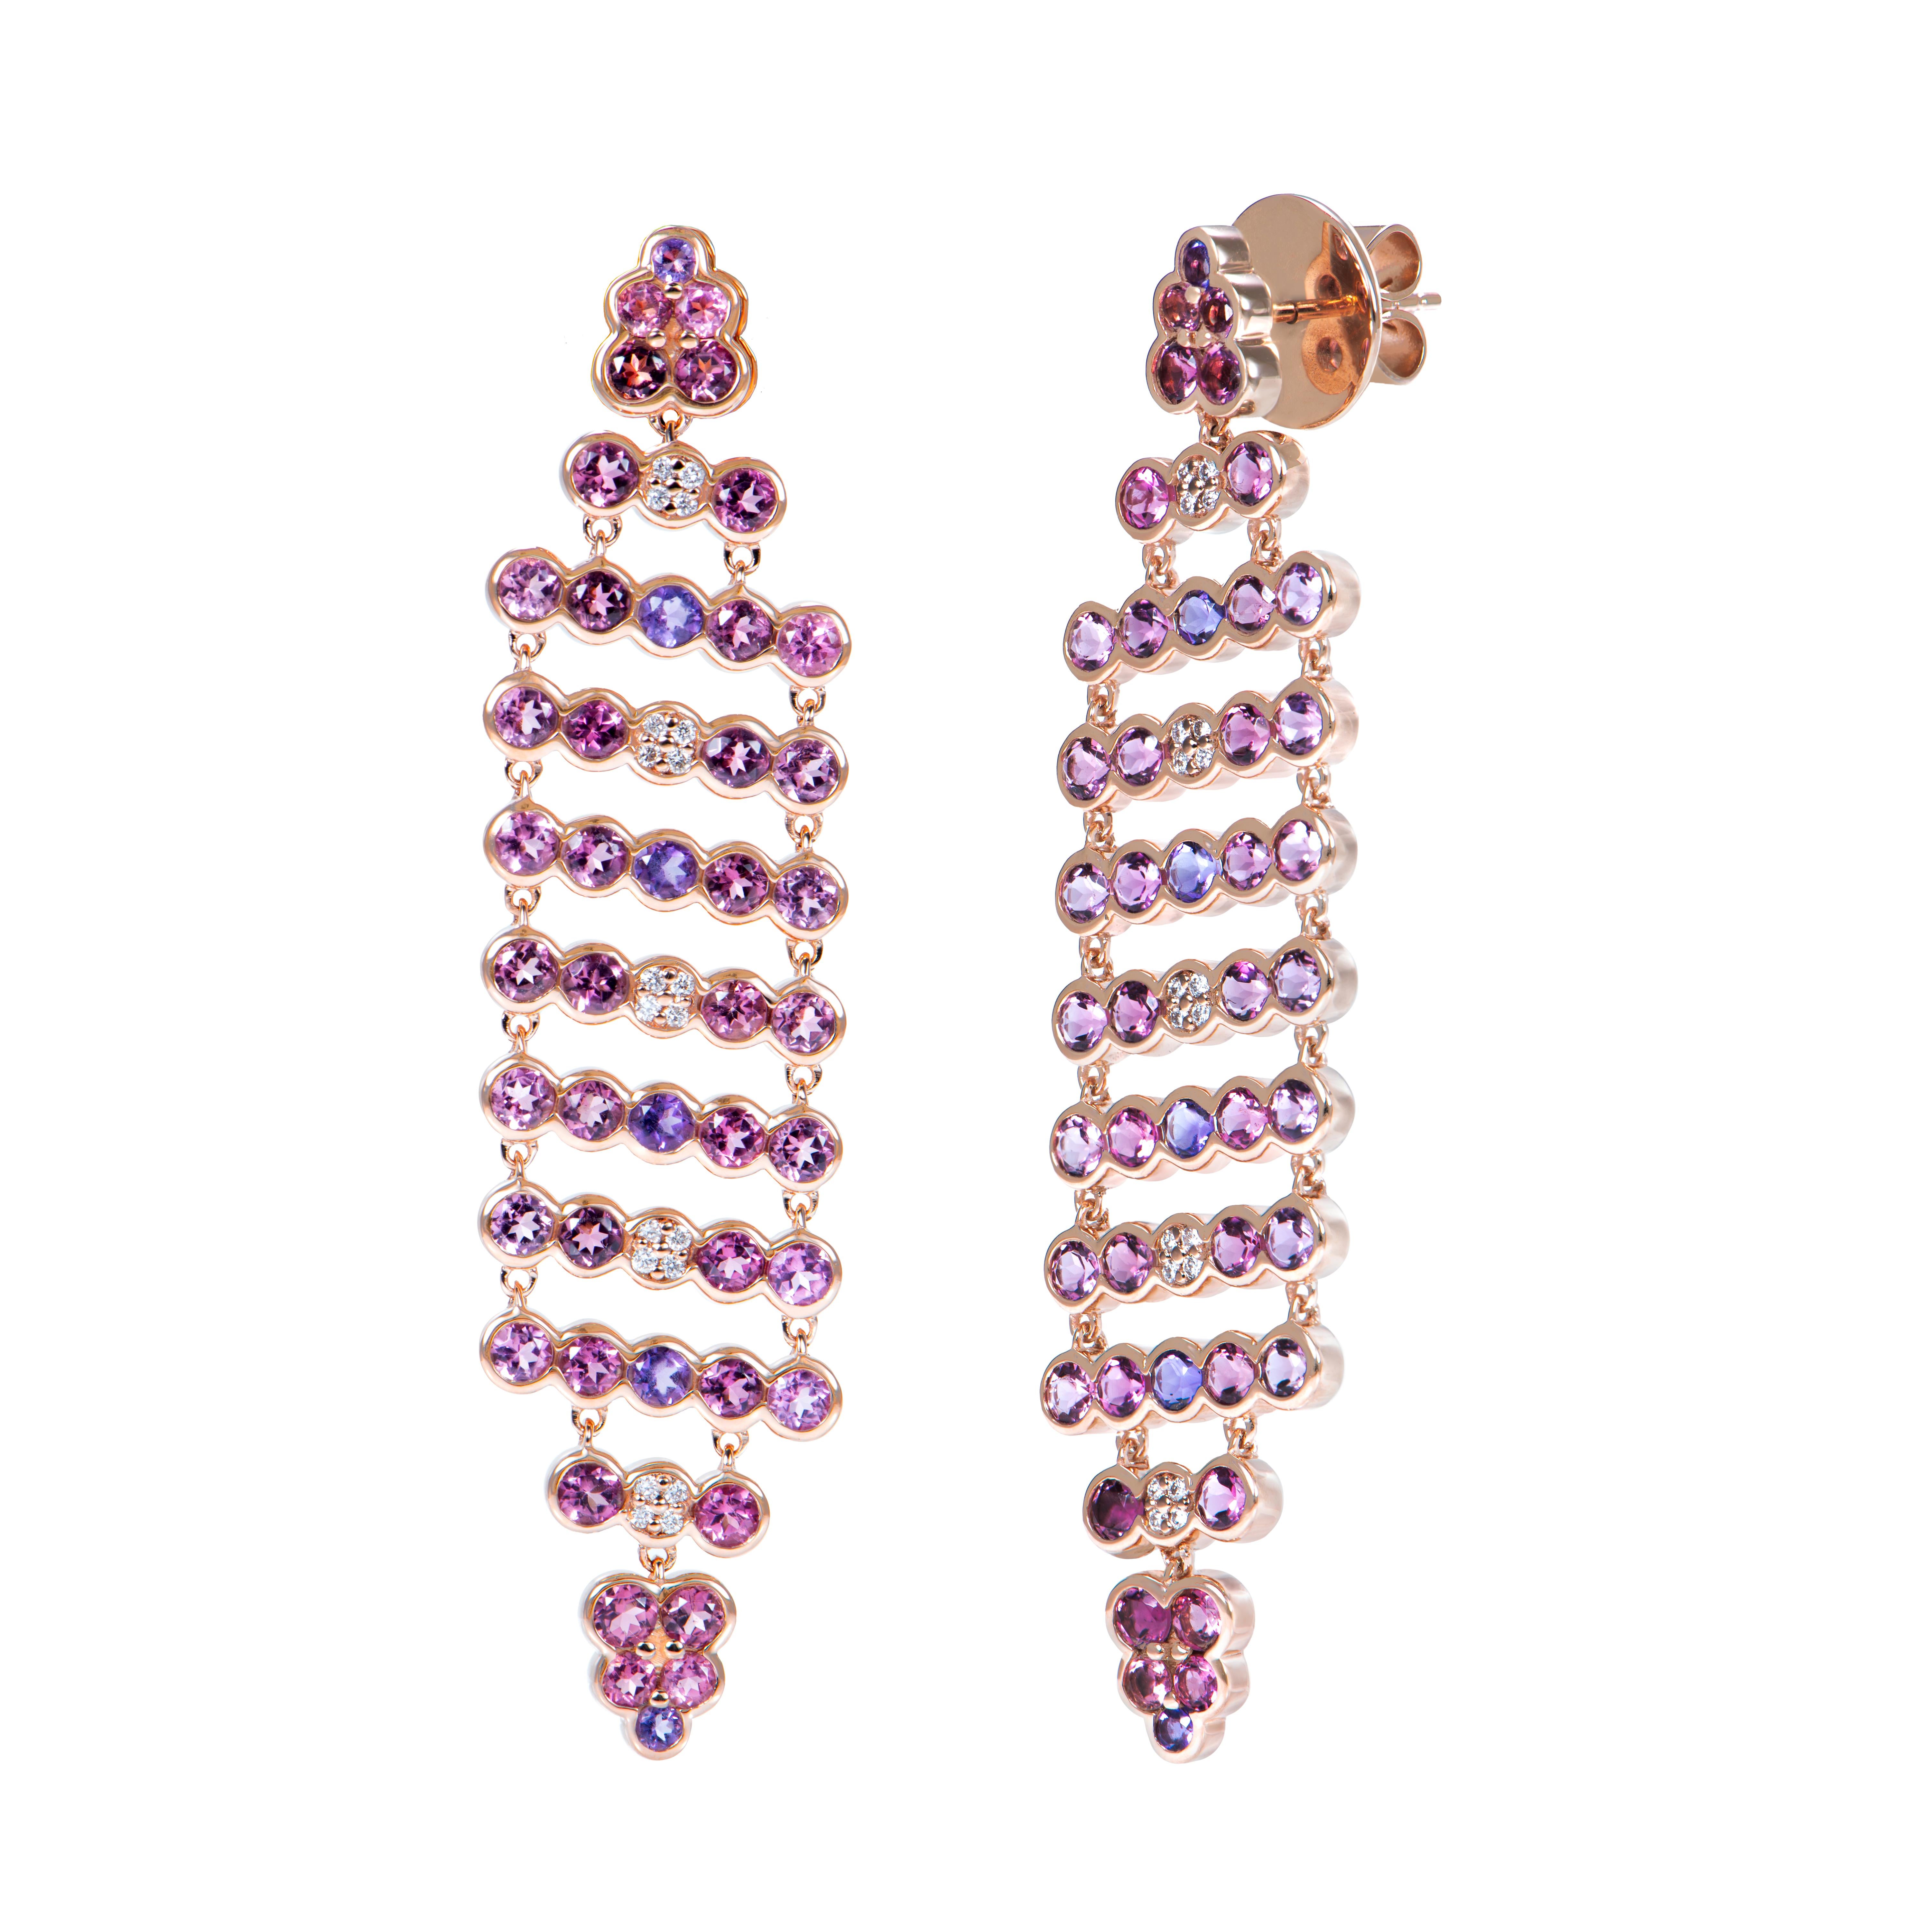 Round Cut Amethyst Dangle Earring with Pink Tourmaline and Diamond in 18 Karat Rose Gold. For Sale